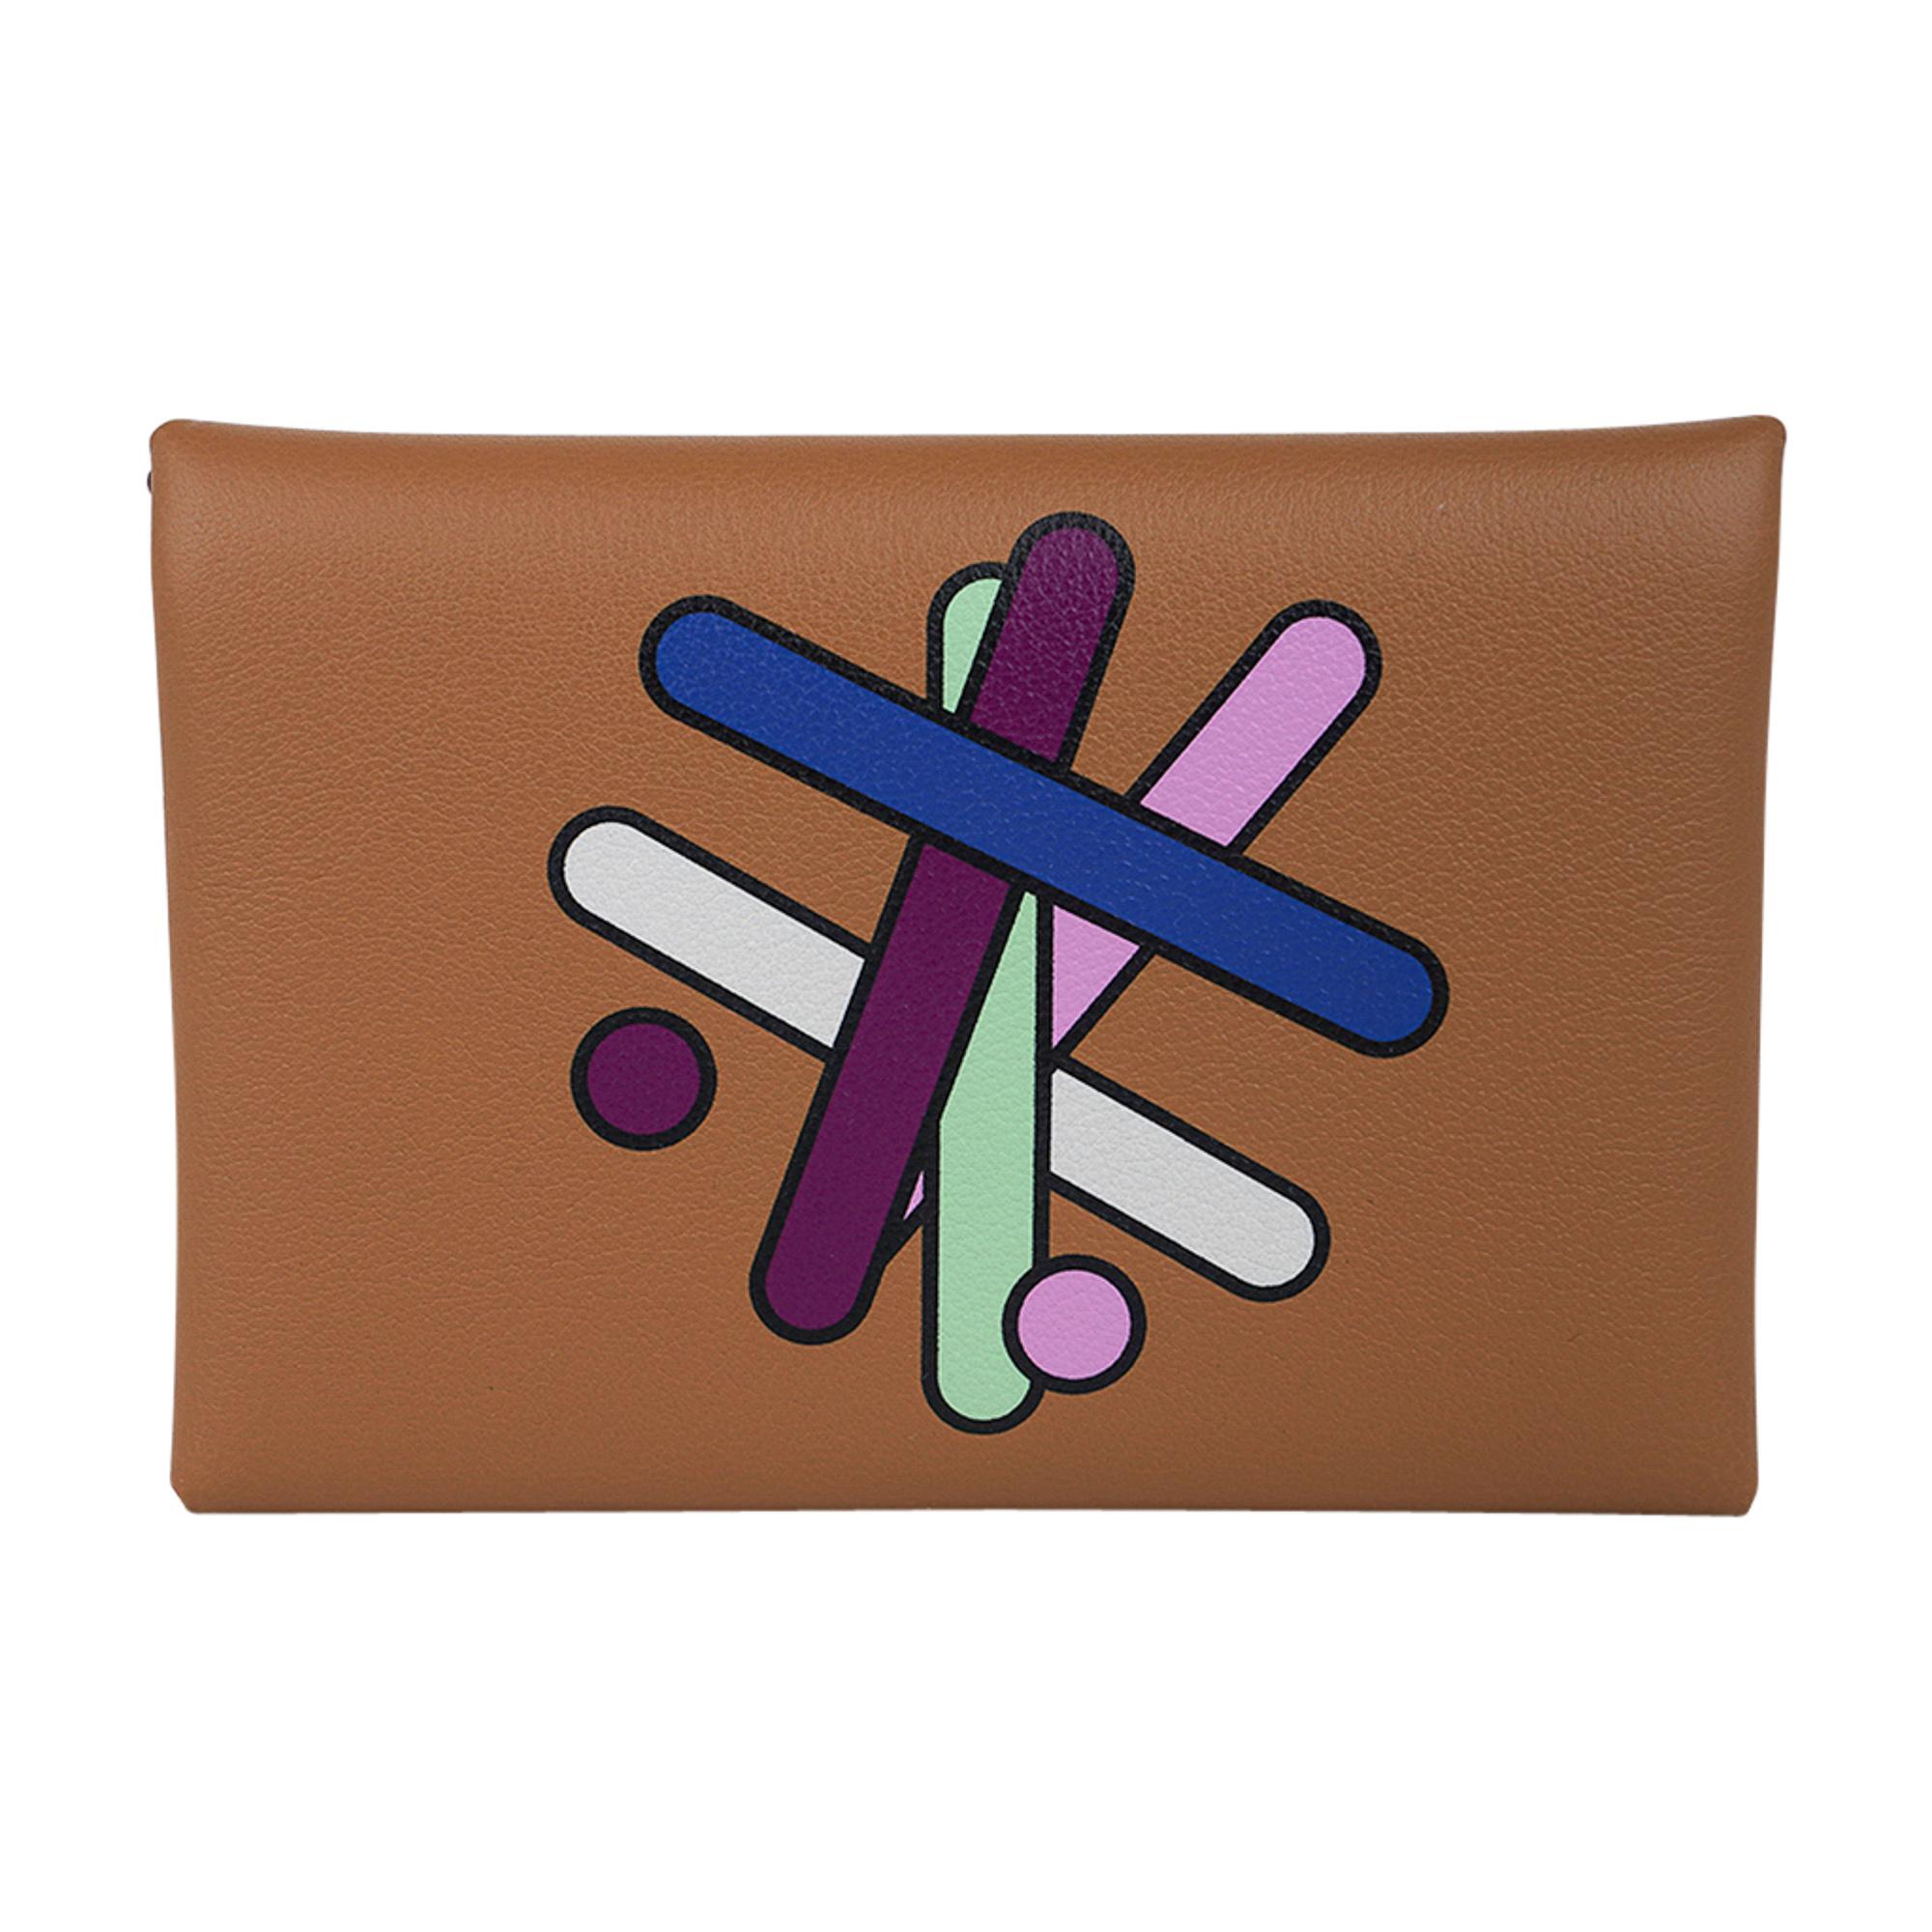 Mightychic offers a rare limited edition  rare limited edition Hermes Calvi Duo card holder 
with Trefle in Biscuit and Blanc.
Printed on both sides.
The new design is clever play on folds of leather that is so functional.
One slot for business